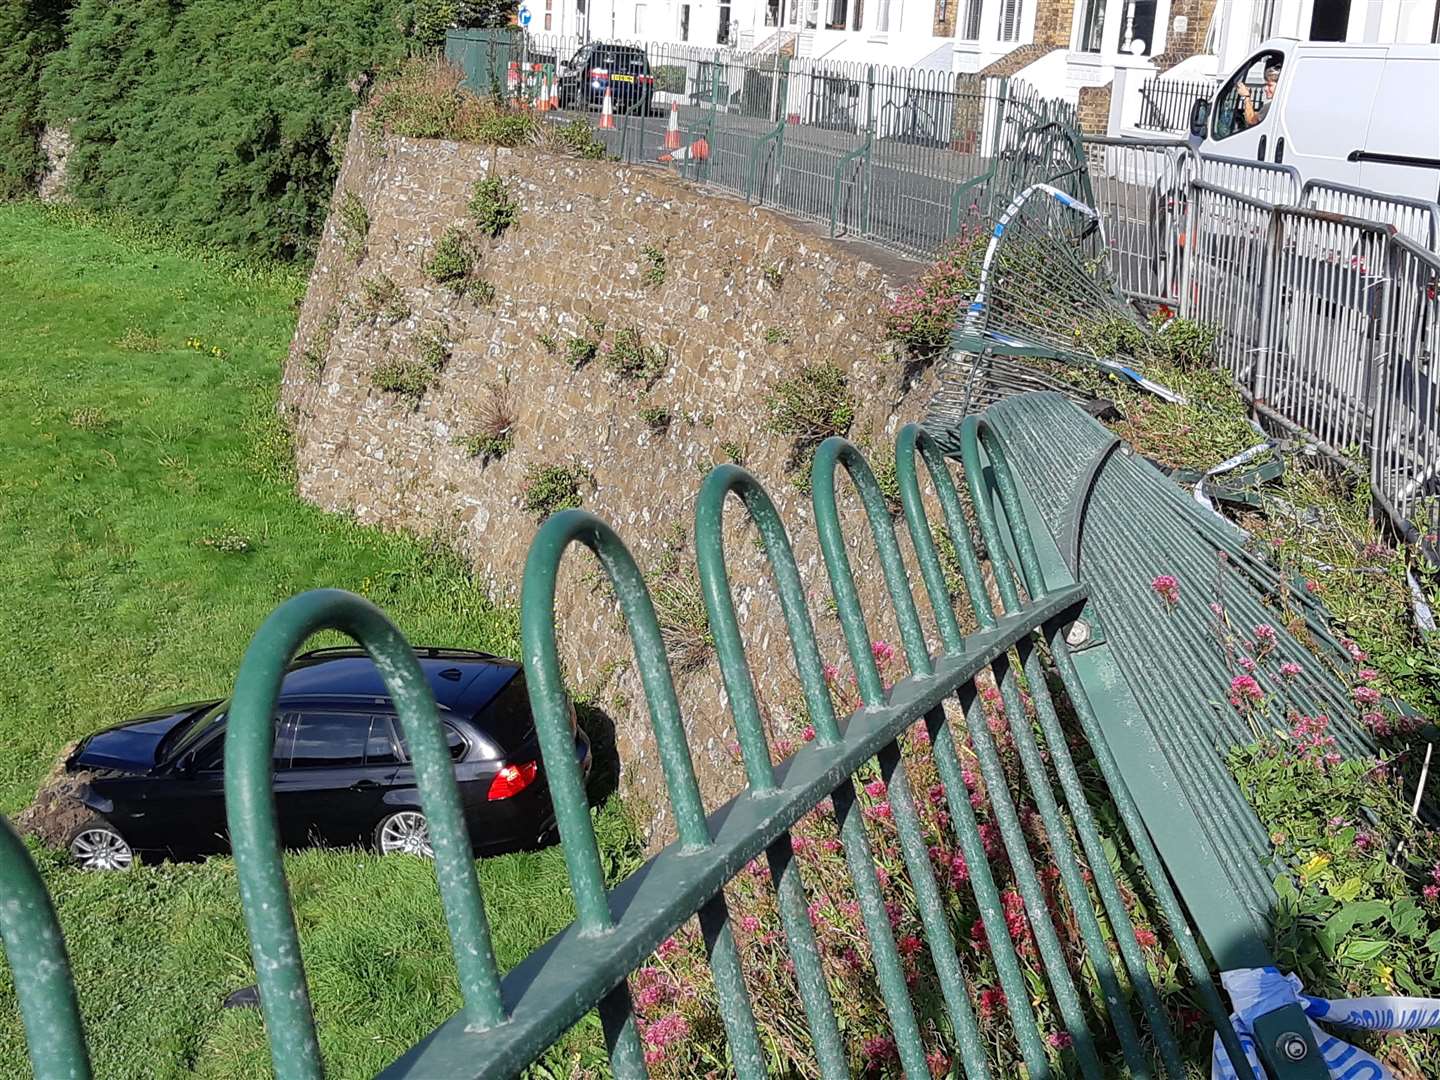 The car smashed through railings before landing in the moat